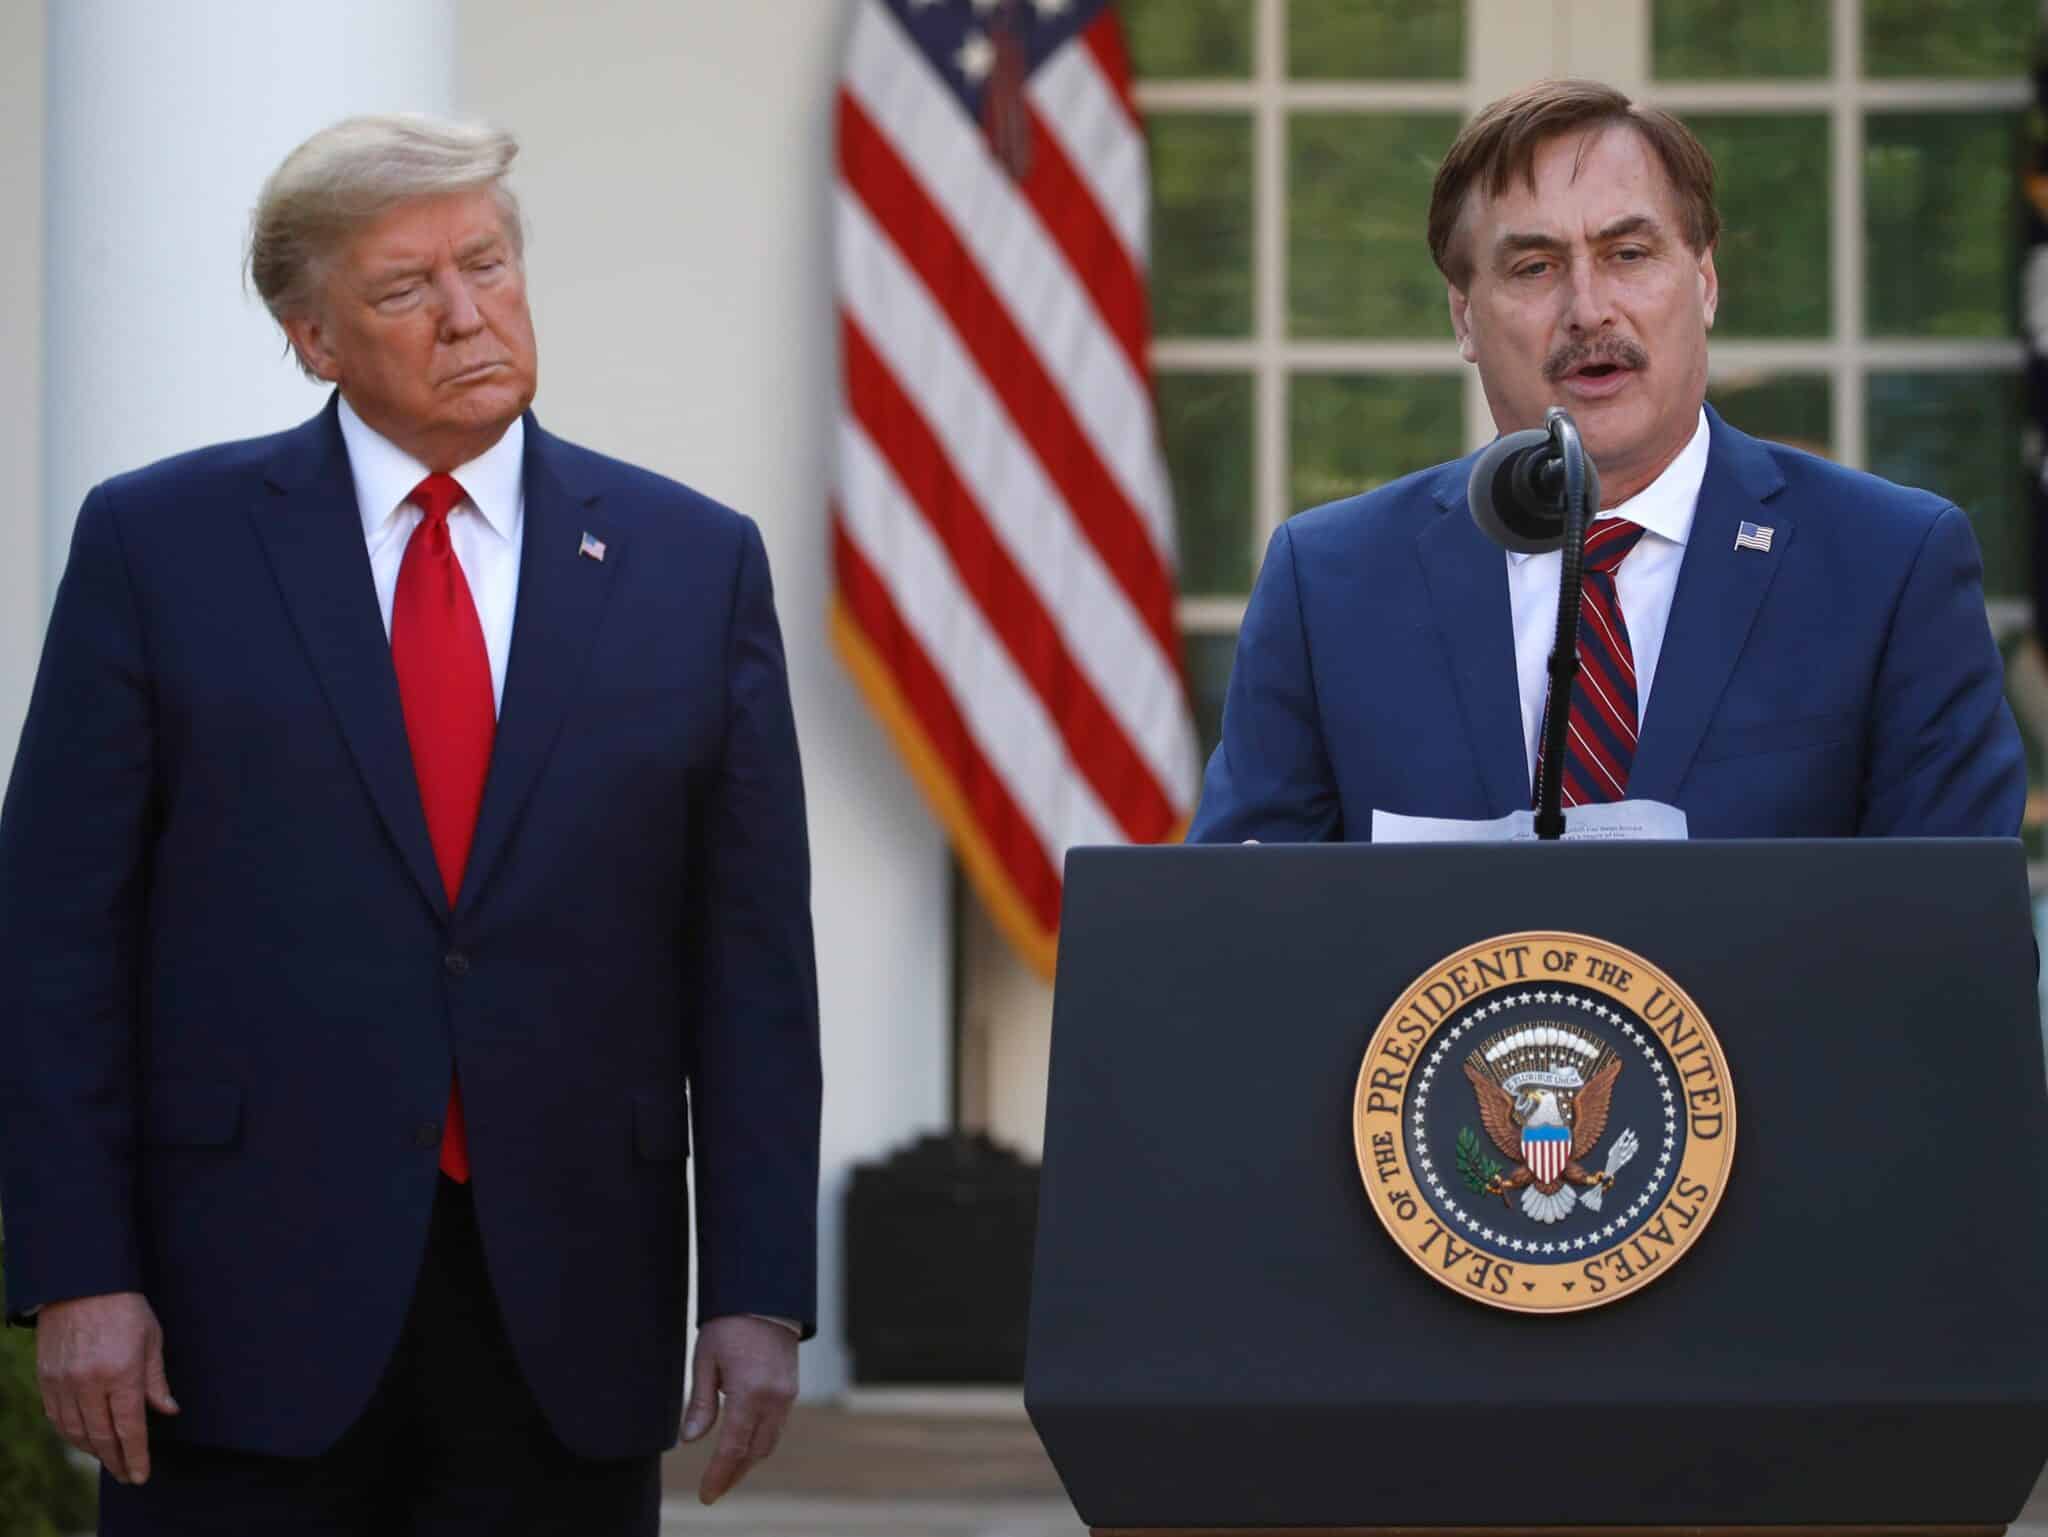 MyPillow CEO Mike Lindell Exposes Election Fraud In Latest Viral Video, "Absolute Proof"